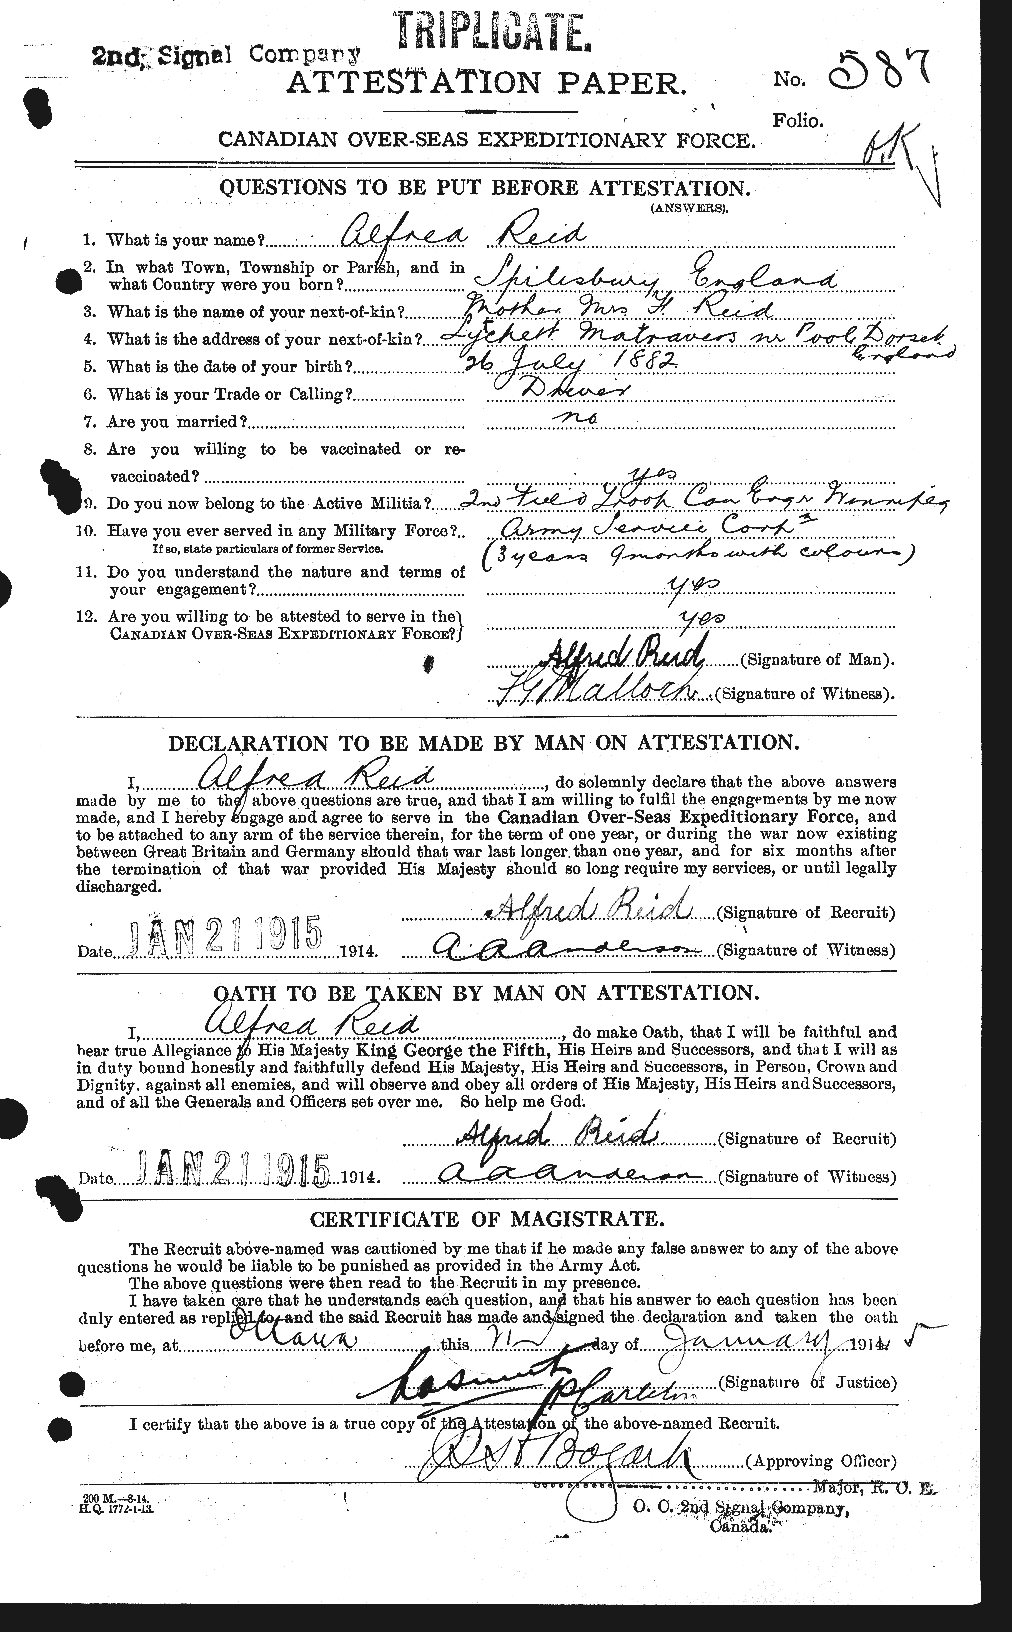 Personnel Records of the First World War - CEF 597789a